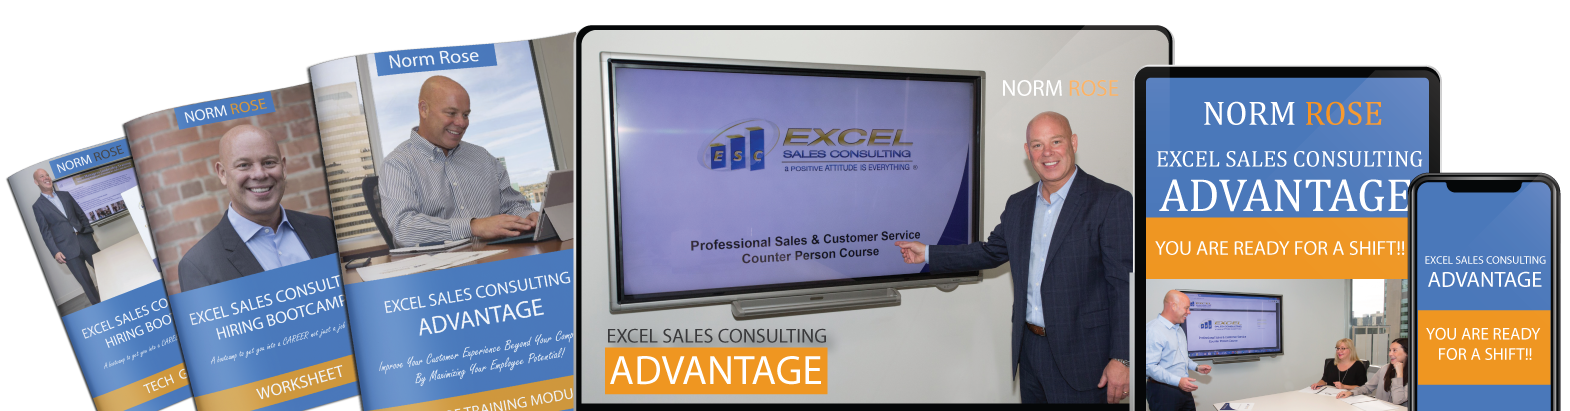 Image of Excel Sales Consulting Advantage Materials